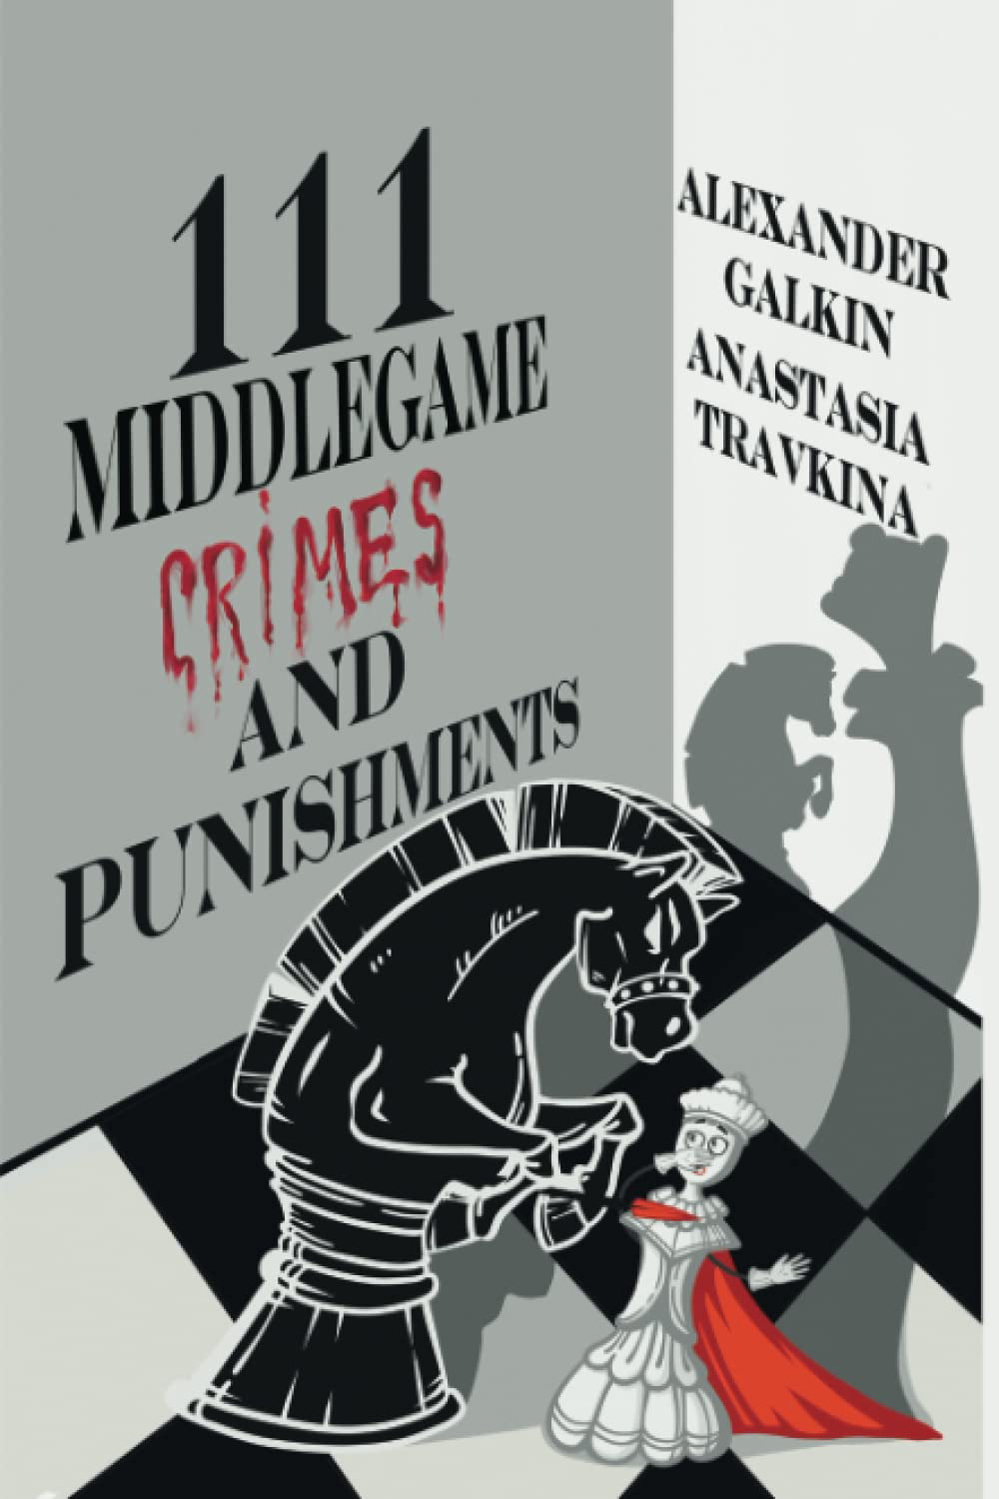 111 Middlegame  crimes and punishments